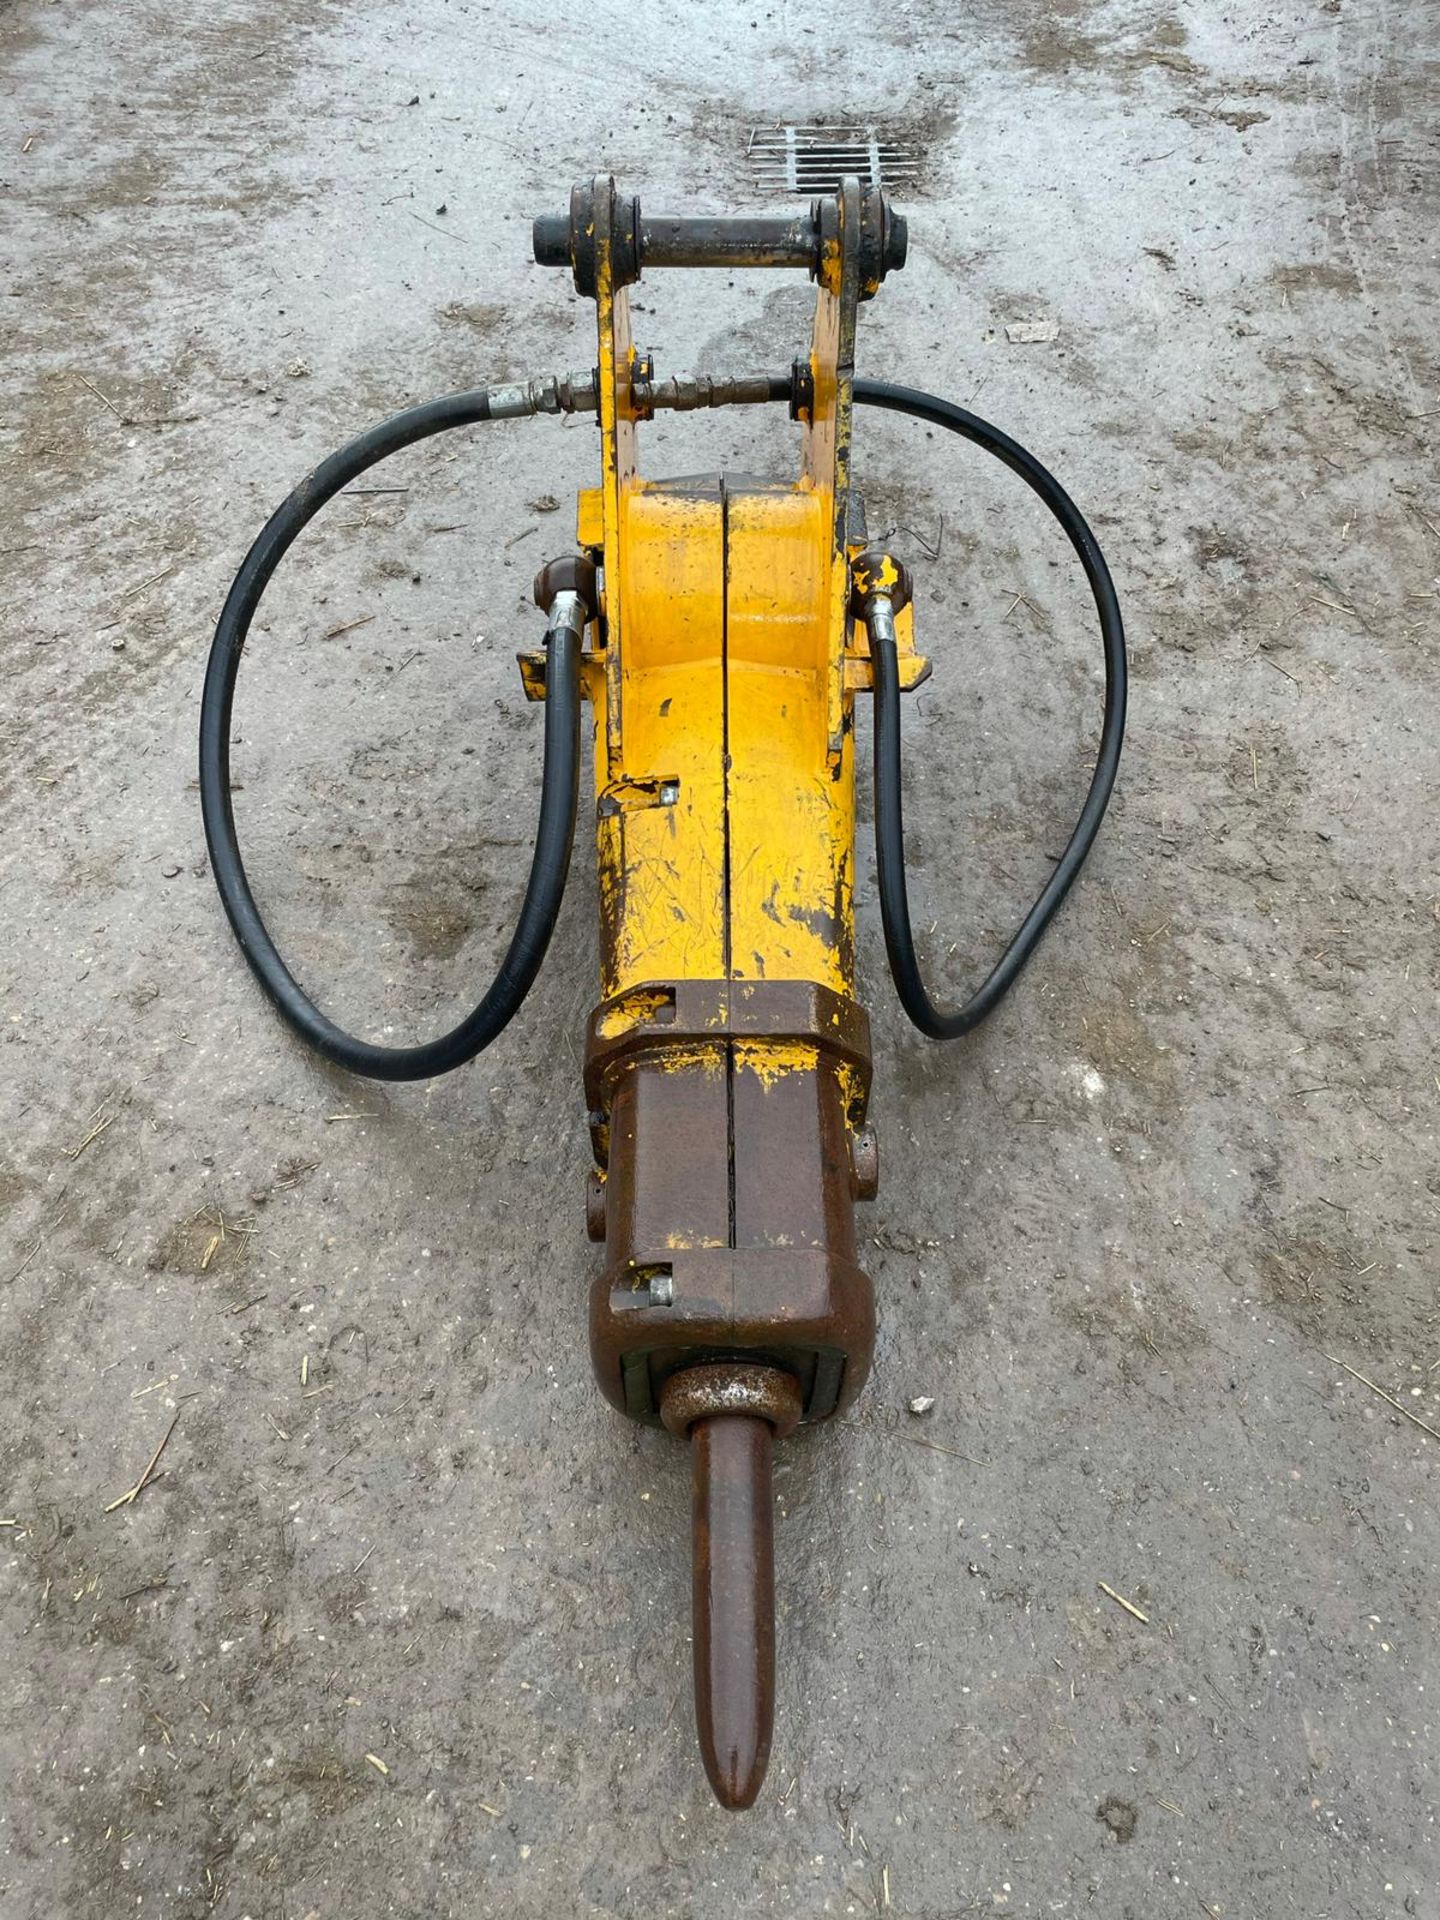 JCB HAMMERMASTER 3600 ROCK BREAKER, 45mm PINS, CHISEL AND PIPES ARE INCLUDED, DIRECT FROM COUNCIL - Image 5 of 7